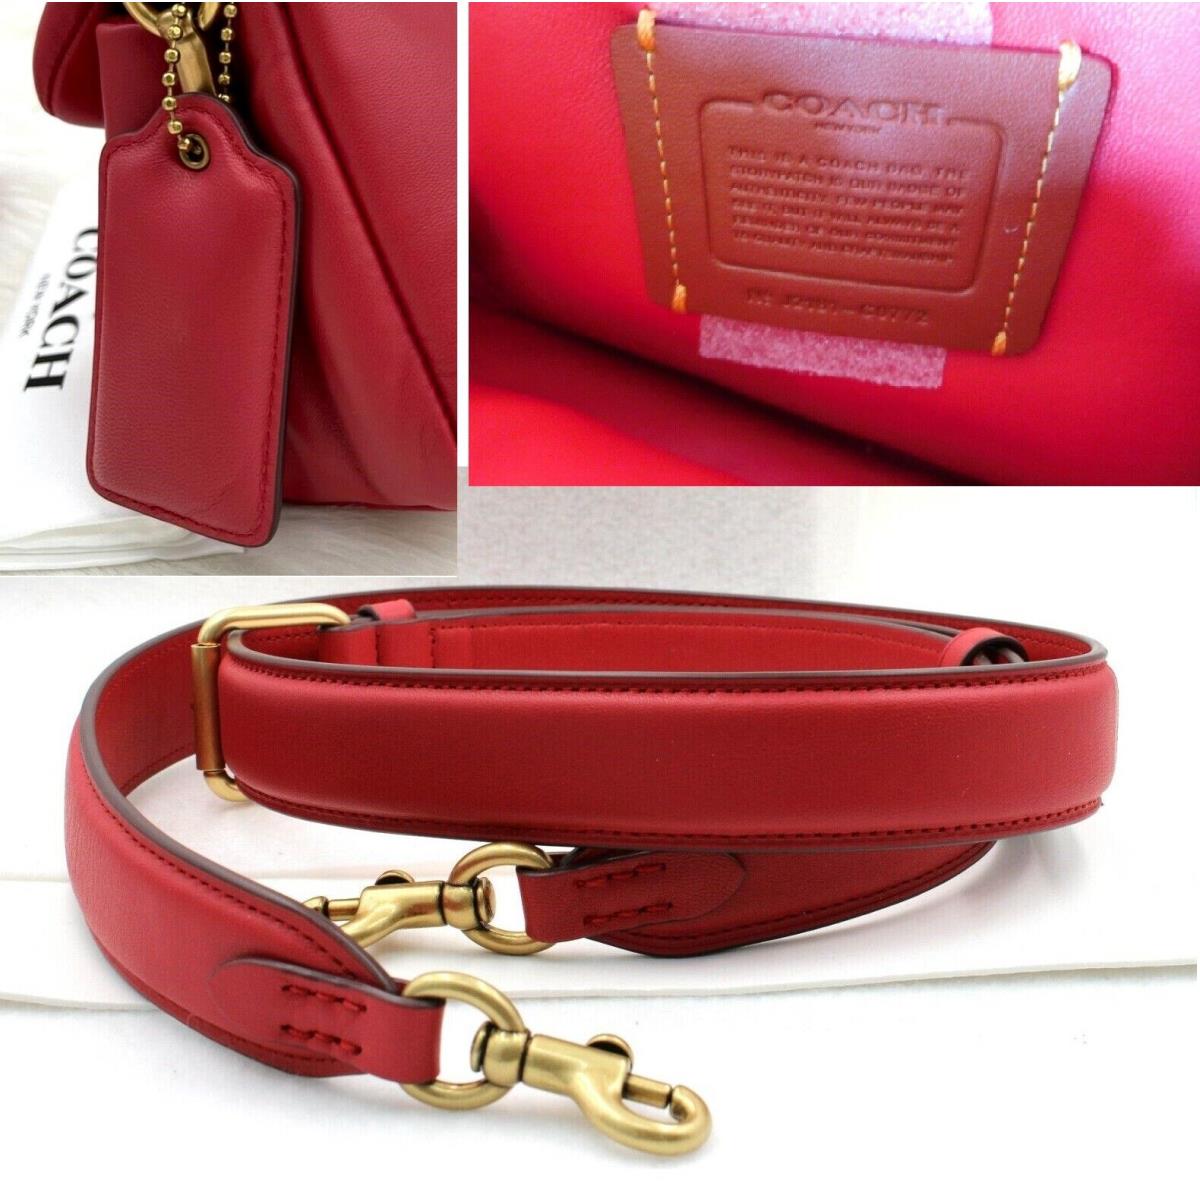 Coach  bag  Tabby - Red Apple , Red Handle/Strap, Gold Hardware 9